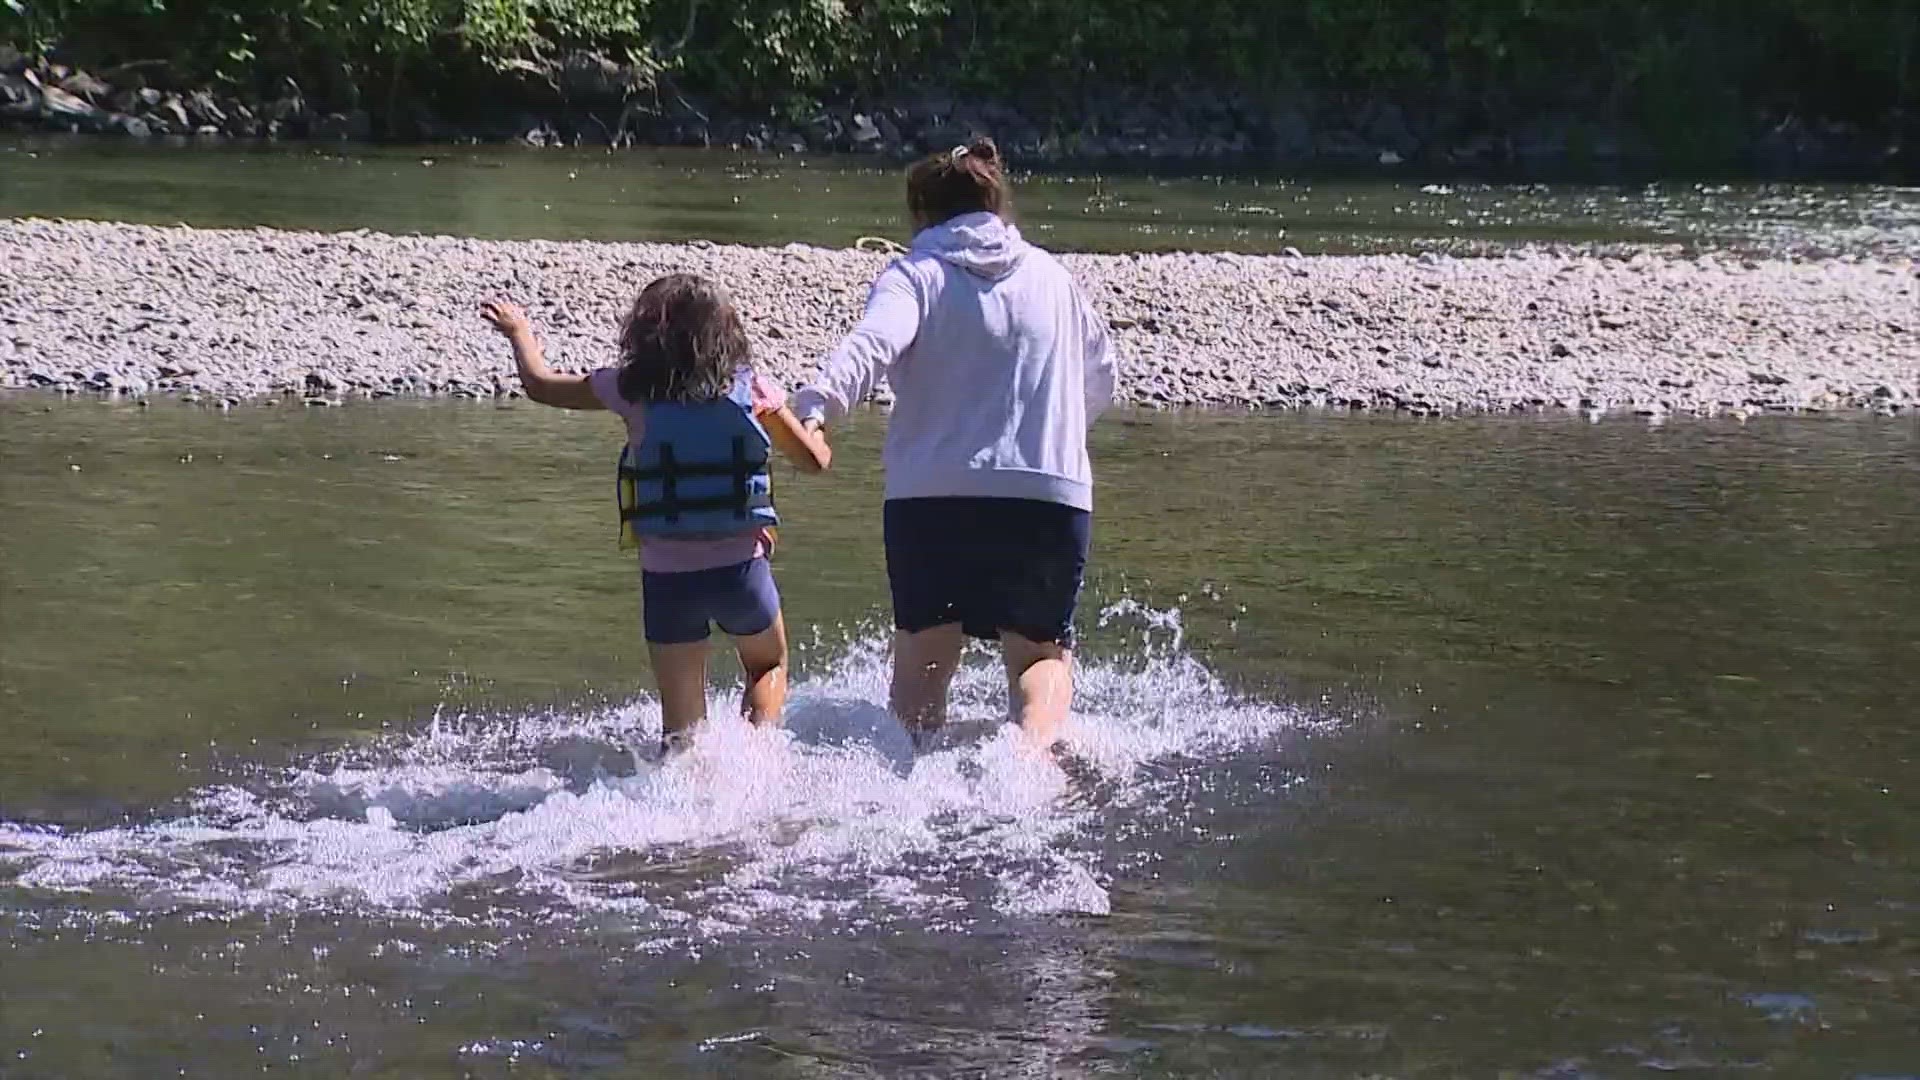 A King County official said 70% of drowning deaths involve drugs, alcohol, or both.